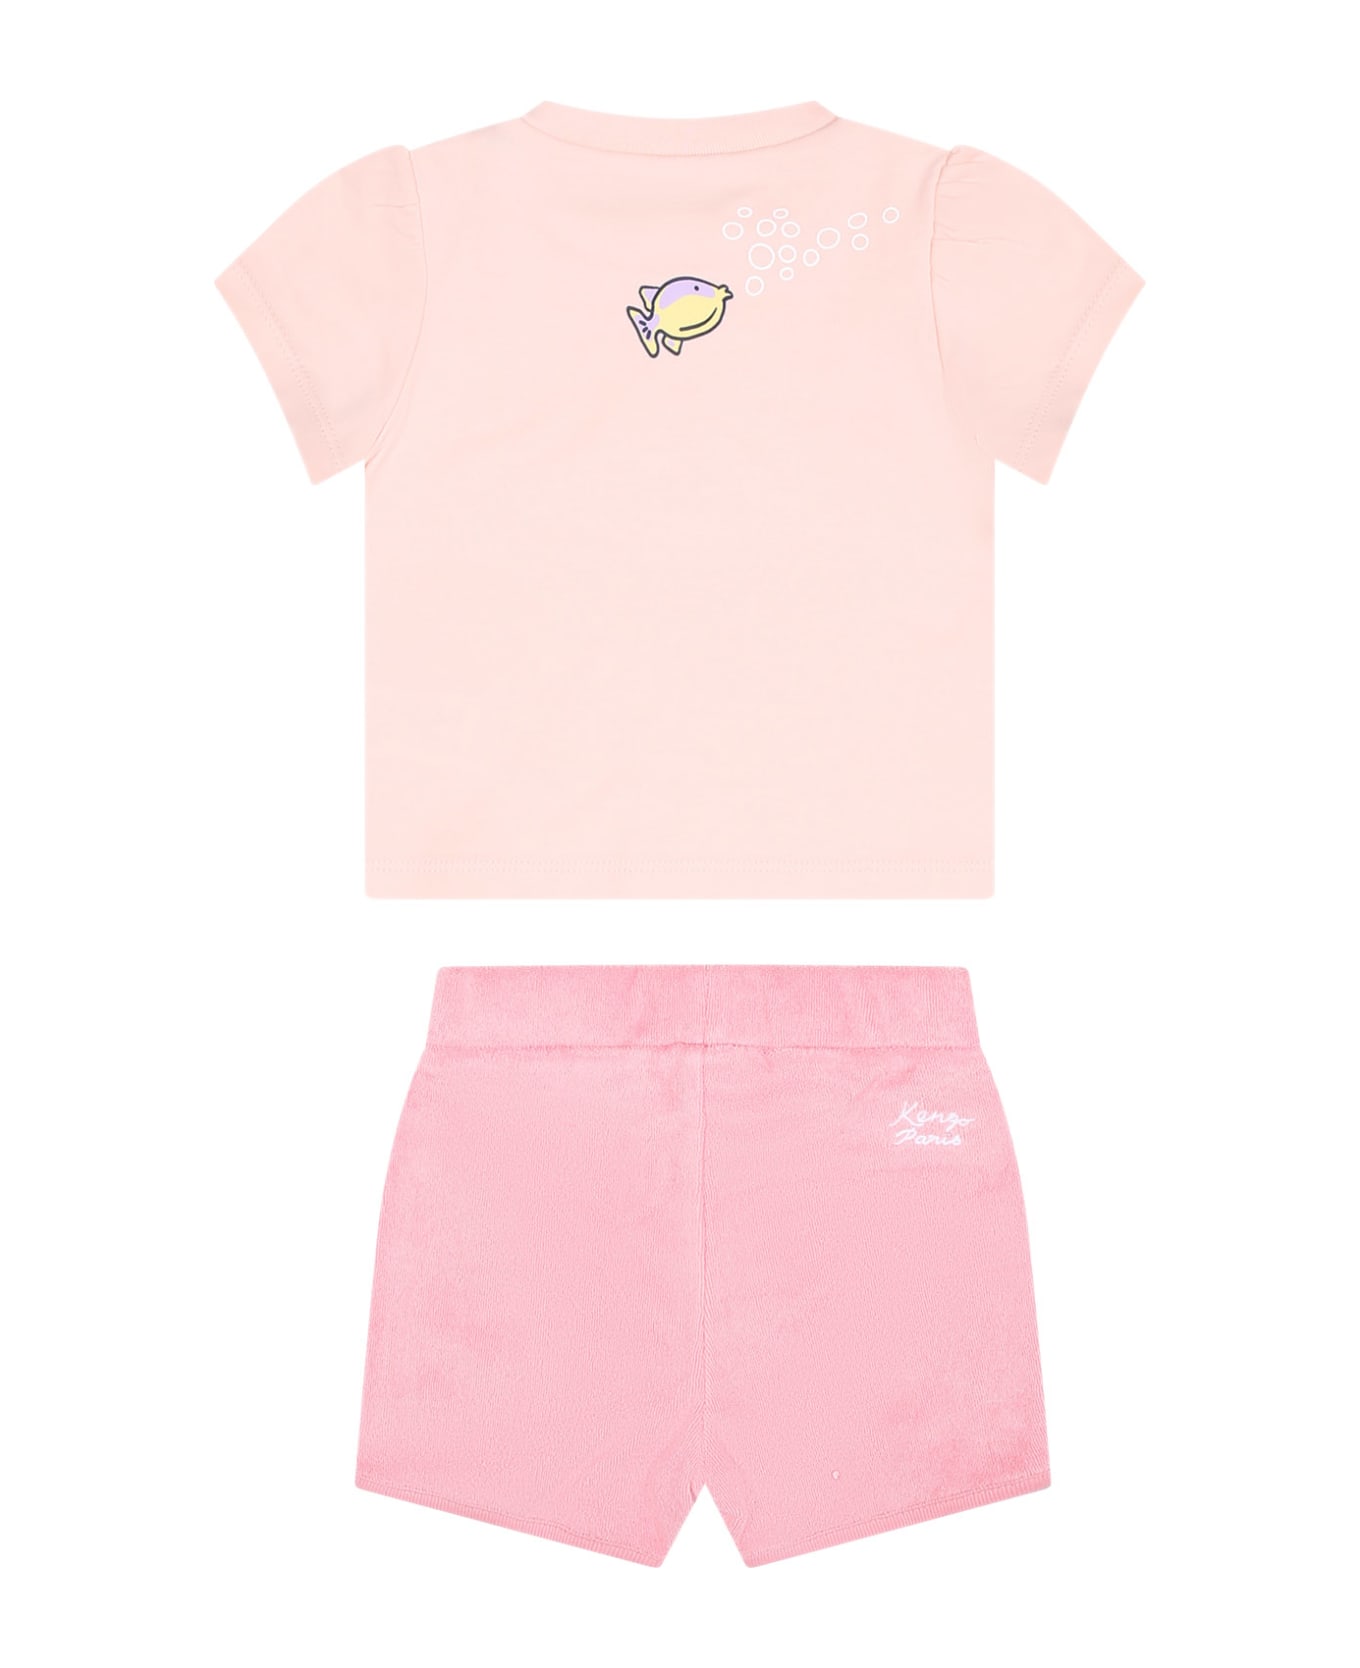 Kenzo Kids Pink Sporty Suit For Baby Girl With Printing - Pink